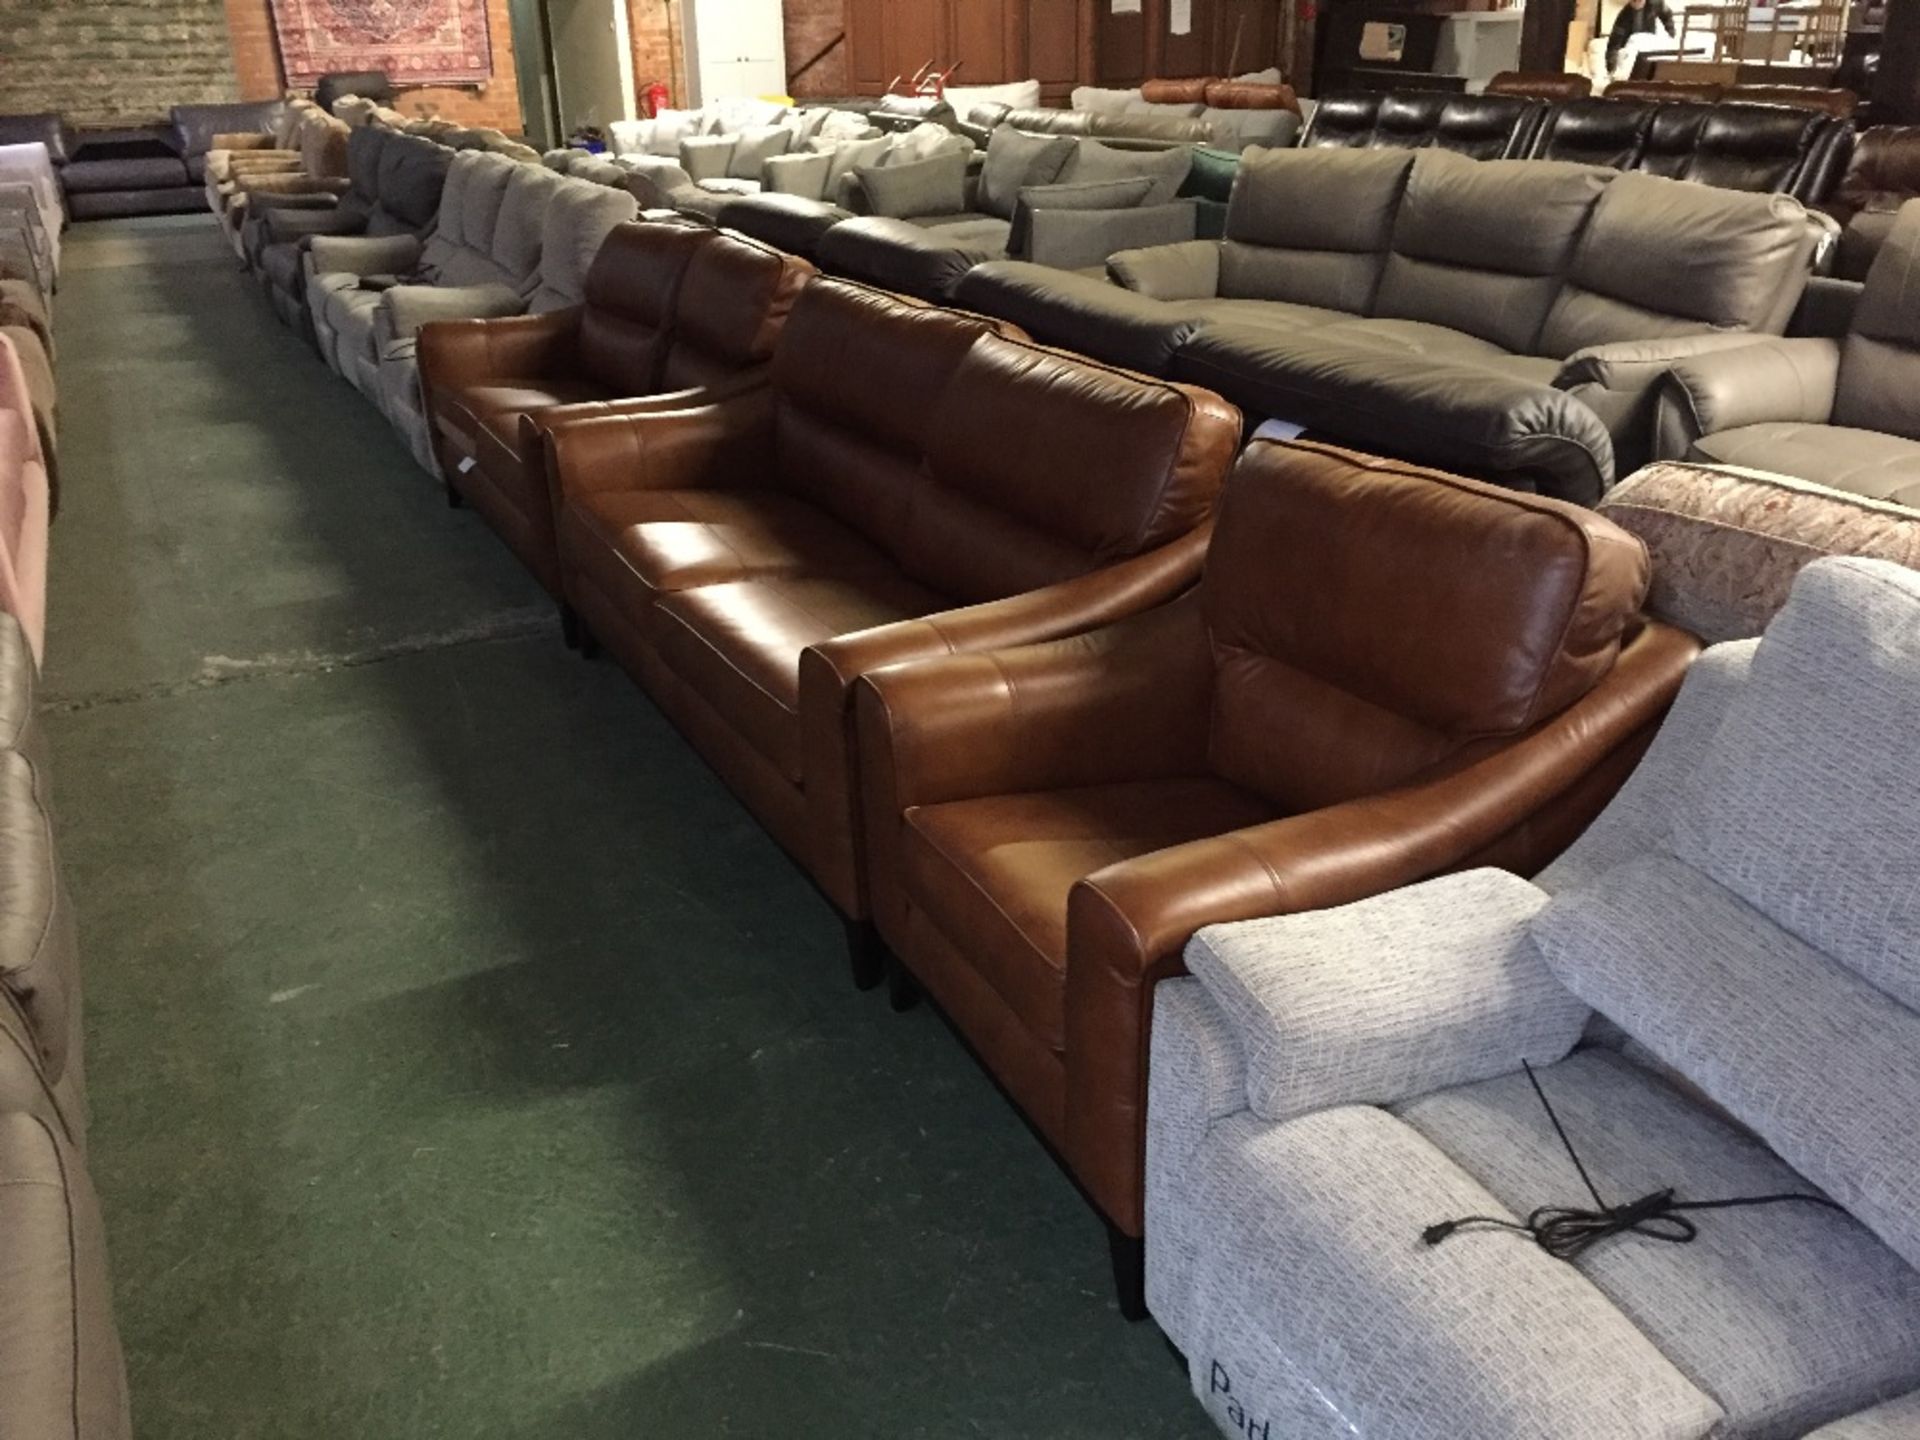 BROWN LEATHER 3 SEATER SOFA 2 SEATER AND CHAIR ((T